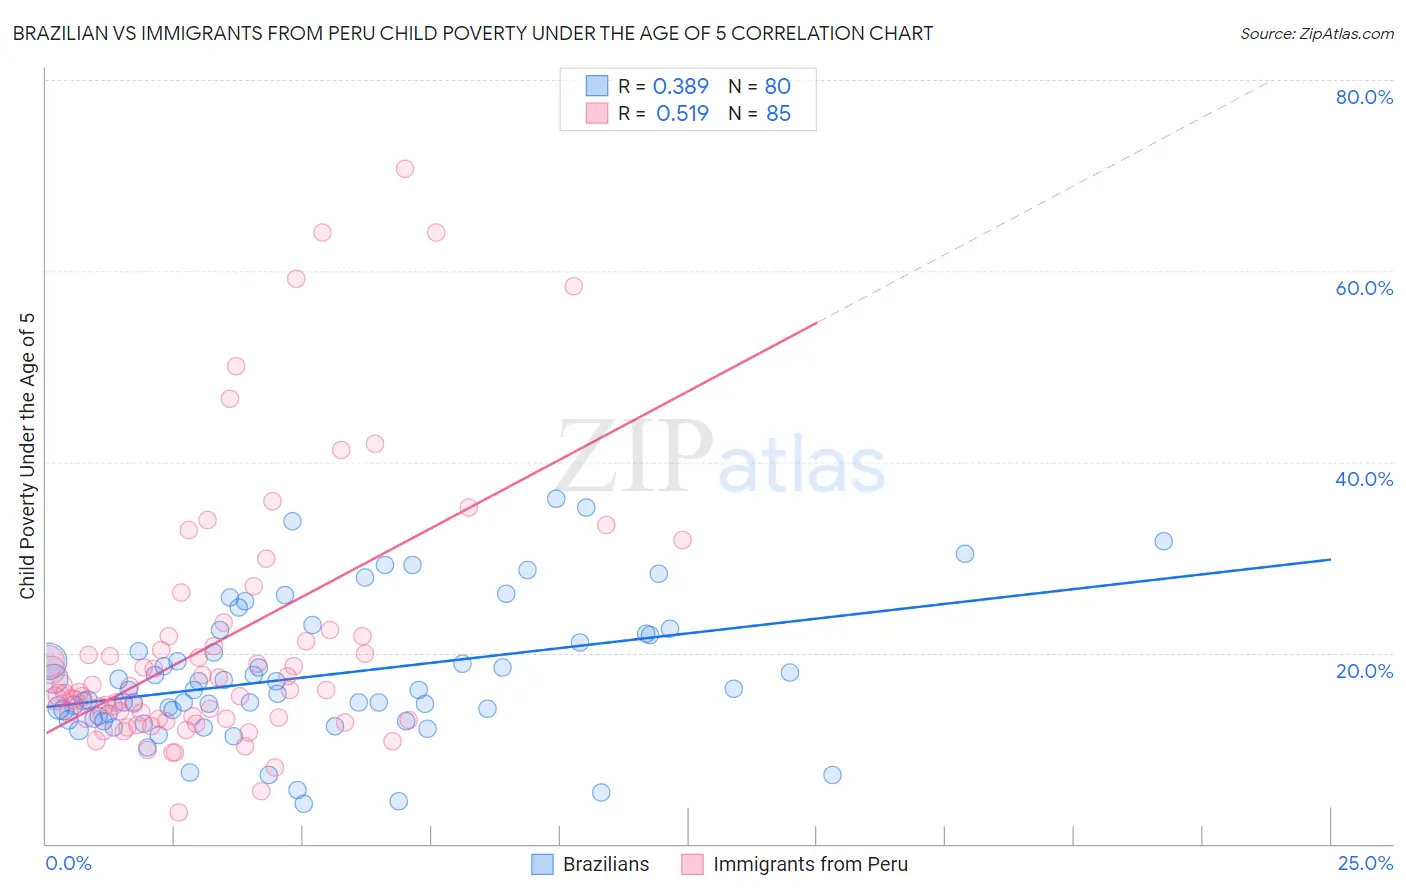 Brazilian vs Immigrants from Peru Child Poverty Under the Age of 5